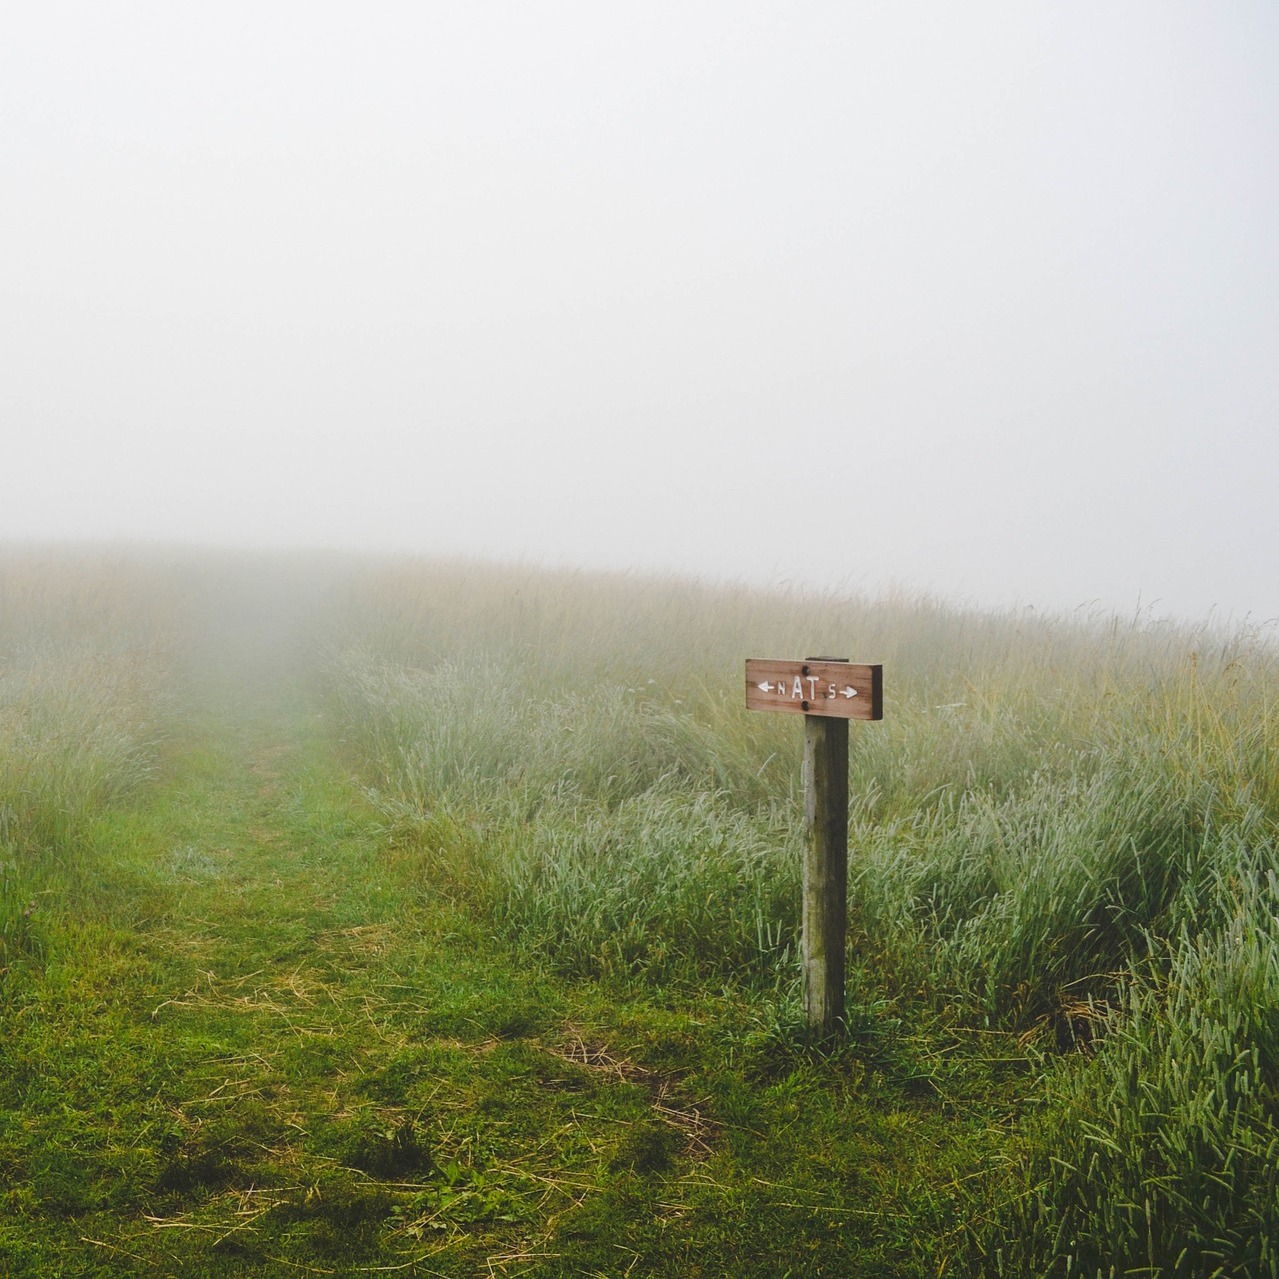 A signpost in a foggy landscape